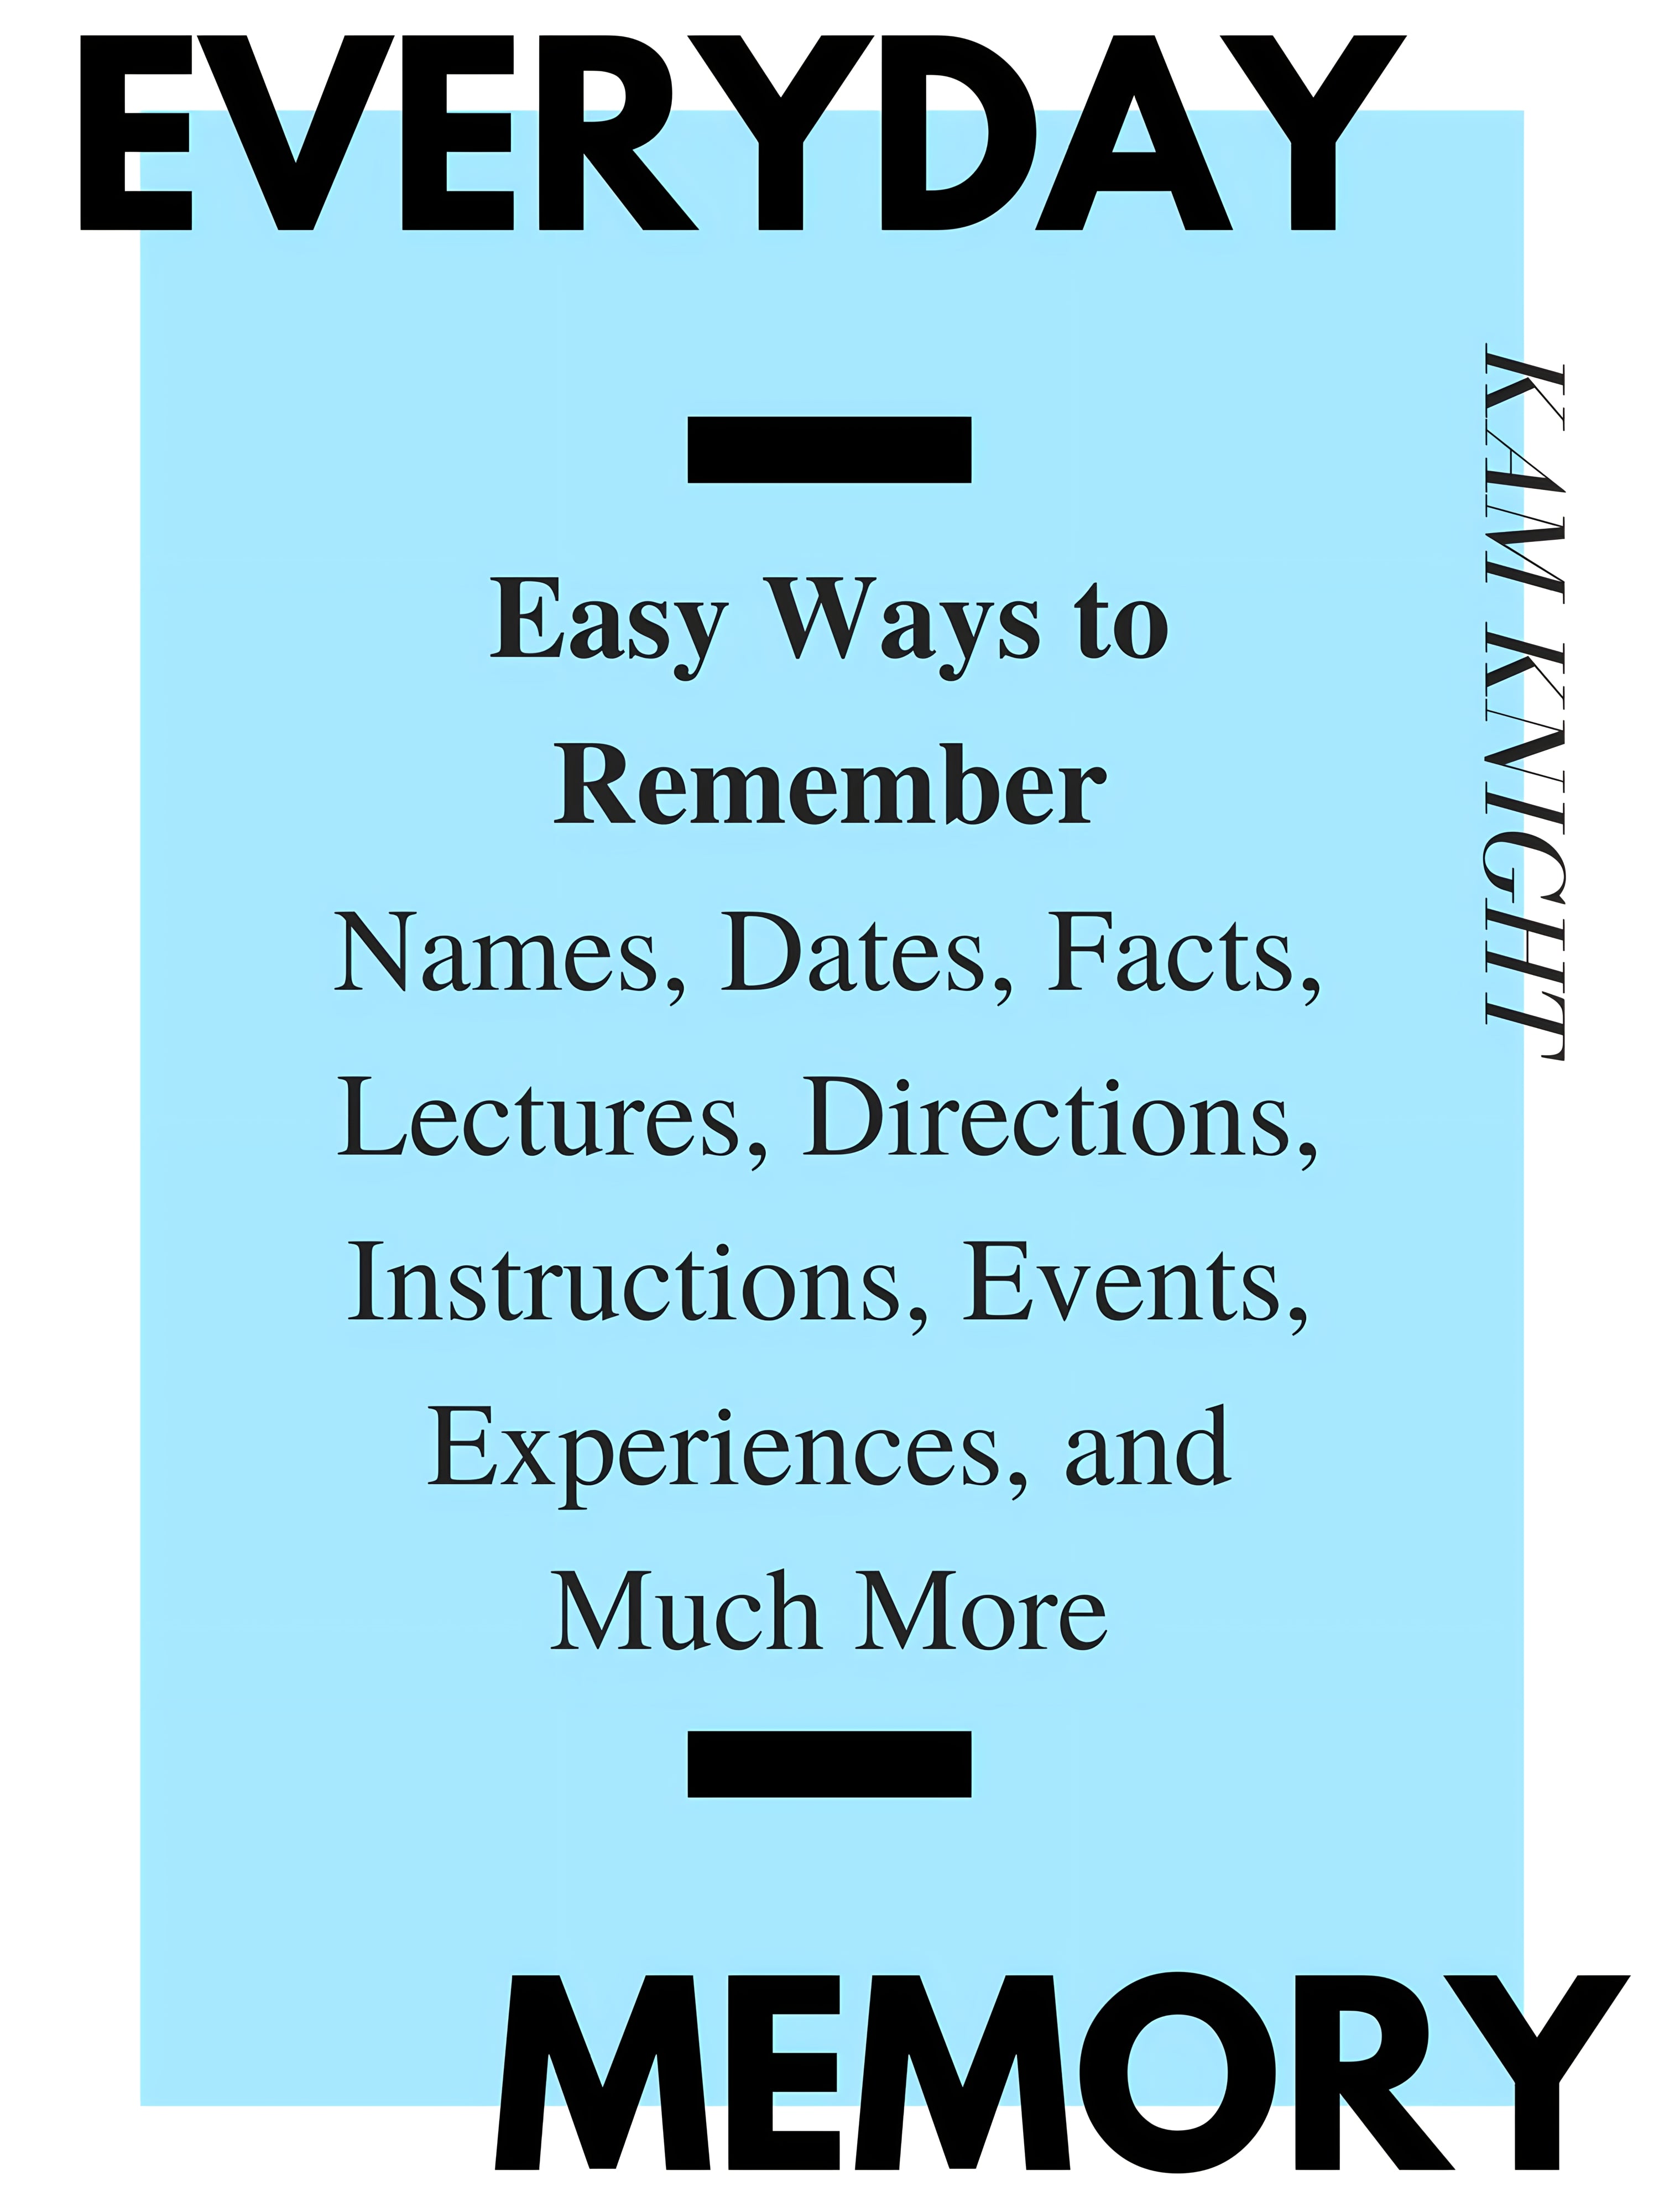 Everyday Memory: Easy Ways to Remember Names, Dates, Facts, Lectures, Directions, Instructions, Events, Experiences, and Much More - eBook